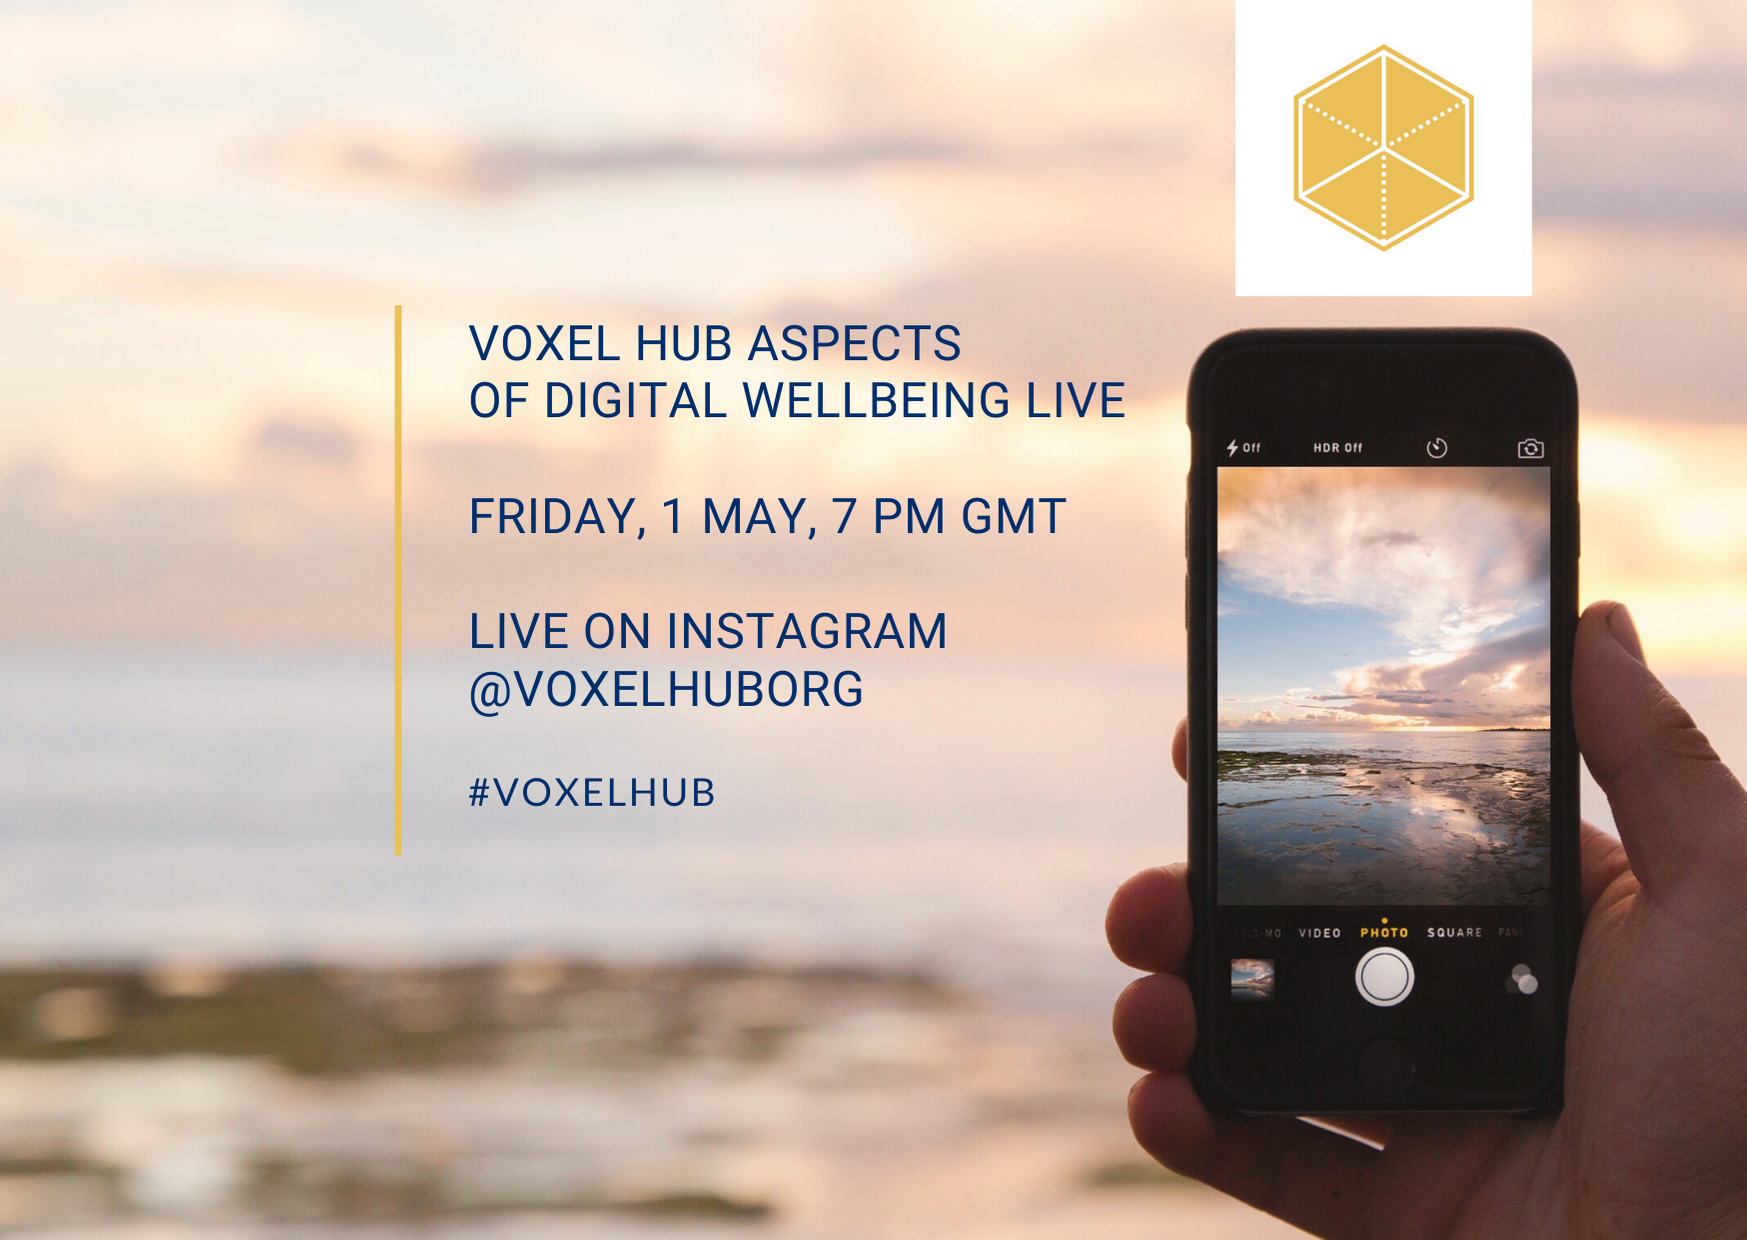 Voxel Hub Aspects of Digital Wellbeing Live